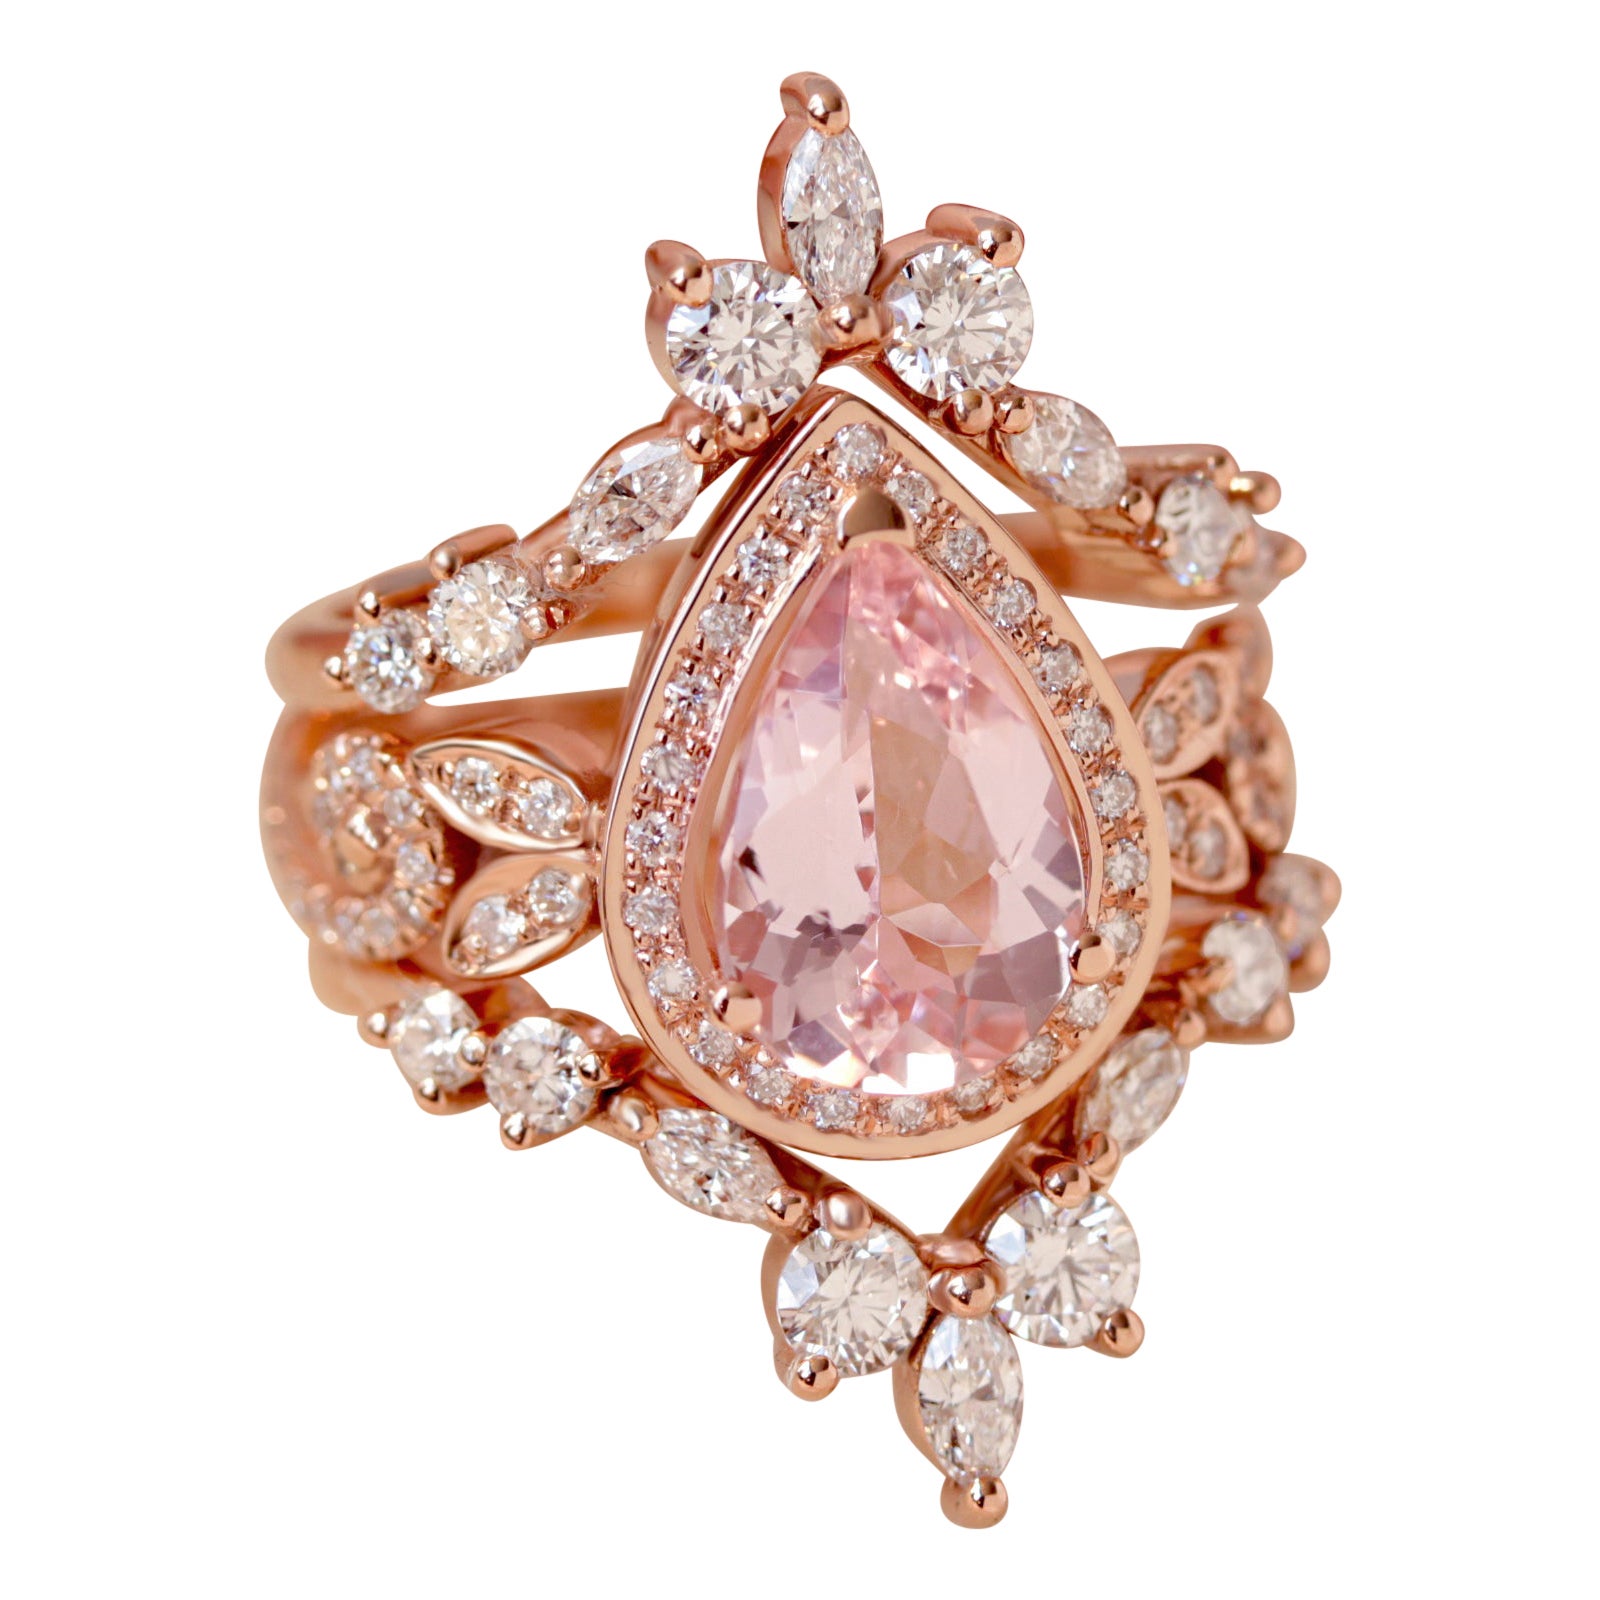 Pear-shaped morganite engagement wave band ring & diamond ring guard enhancer. 
The list is for the engagement with ring guard.
Handmade with care. 
An original design by Silly Shiny Diamonds. 

Details:
* Center stone shape: Pear shape.
* Center